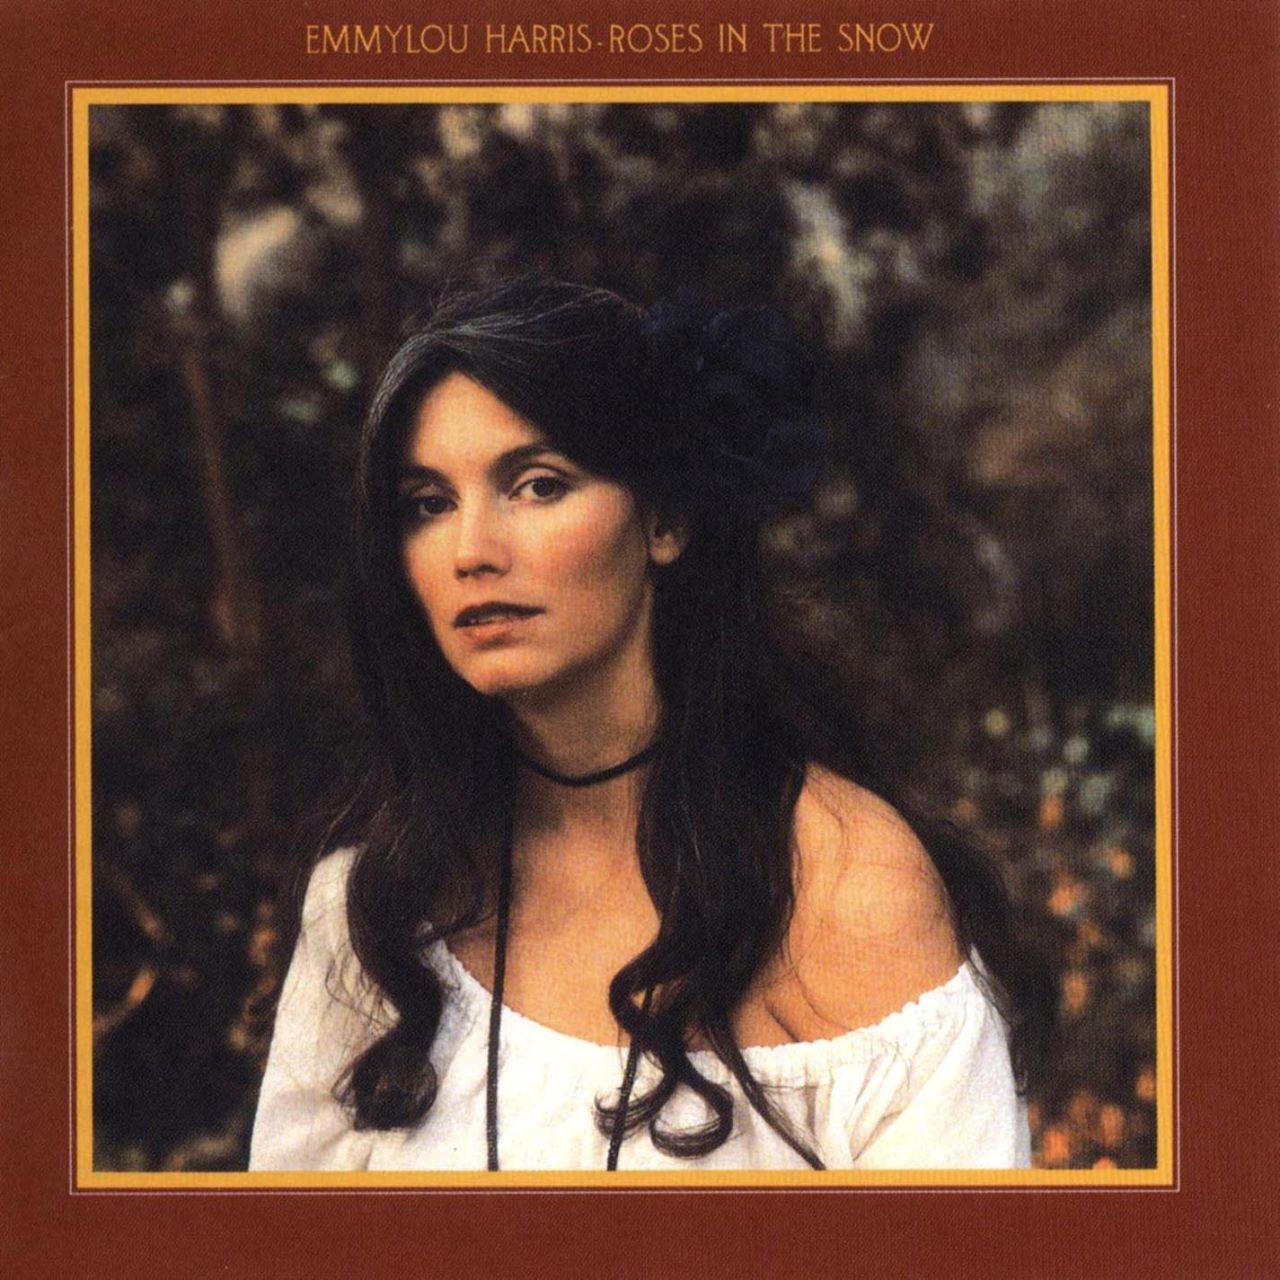 Emmylou Harris – Roses In The Snow cover album